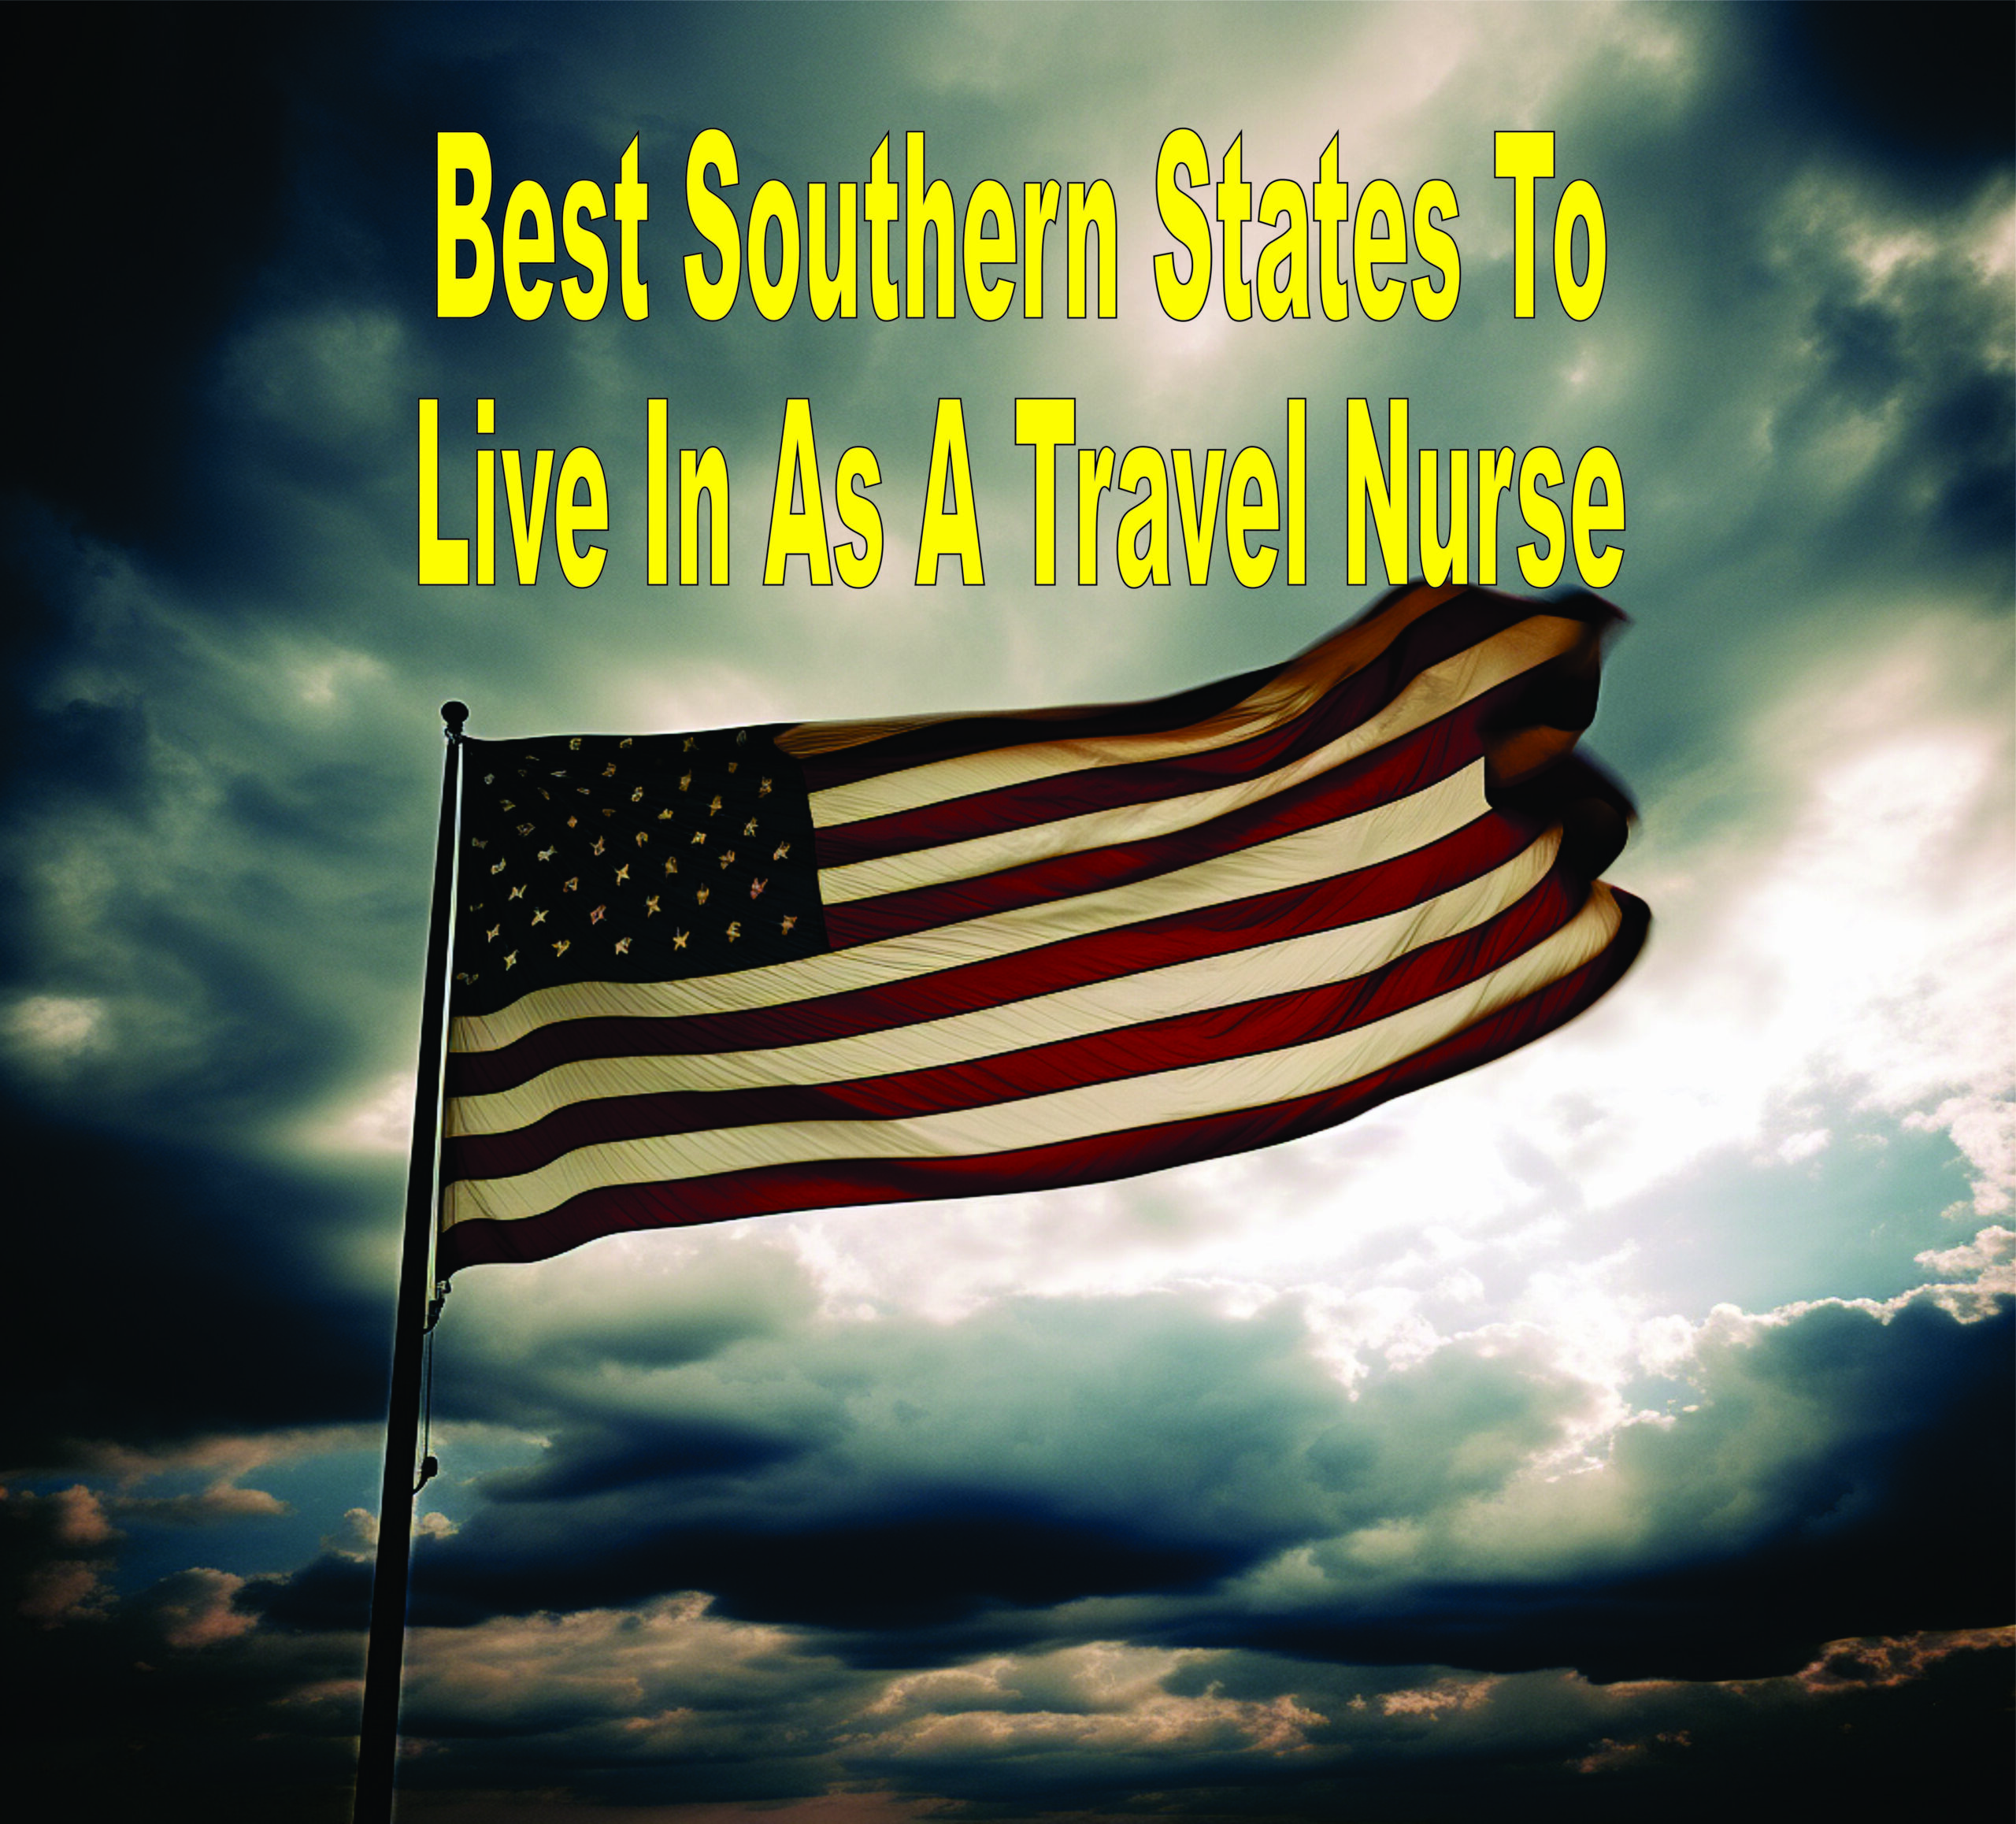 Best Southern States To Live In As A Travel Nurse